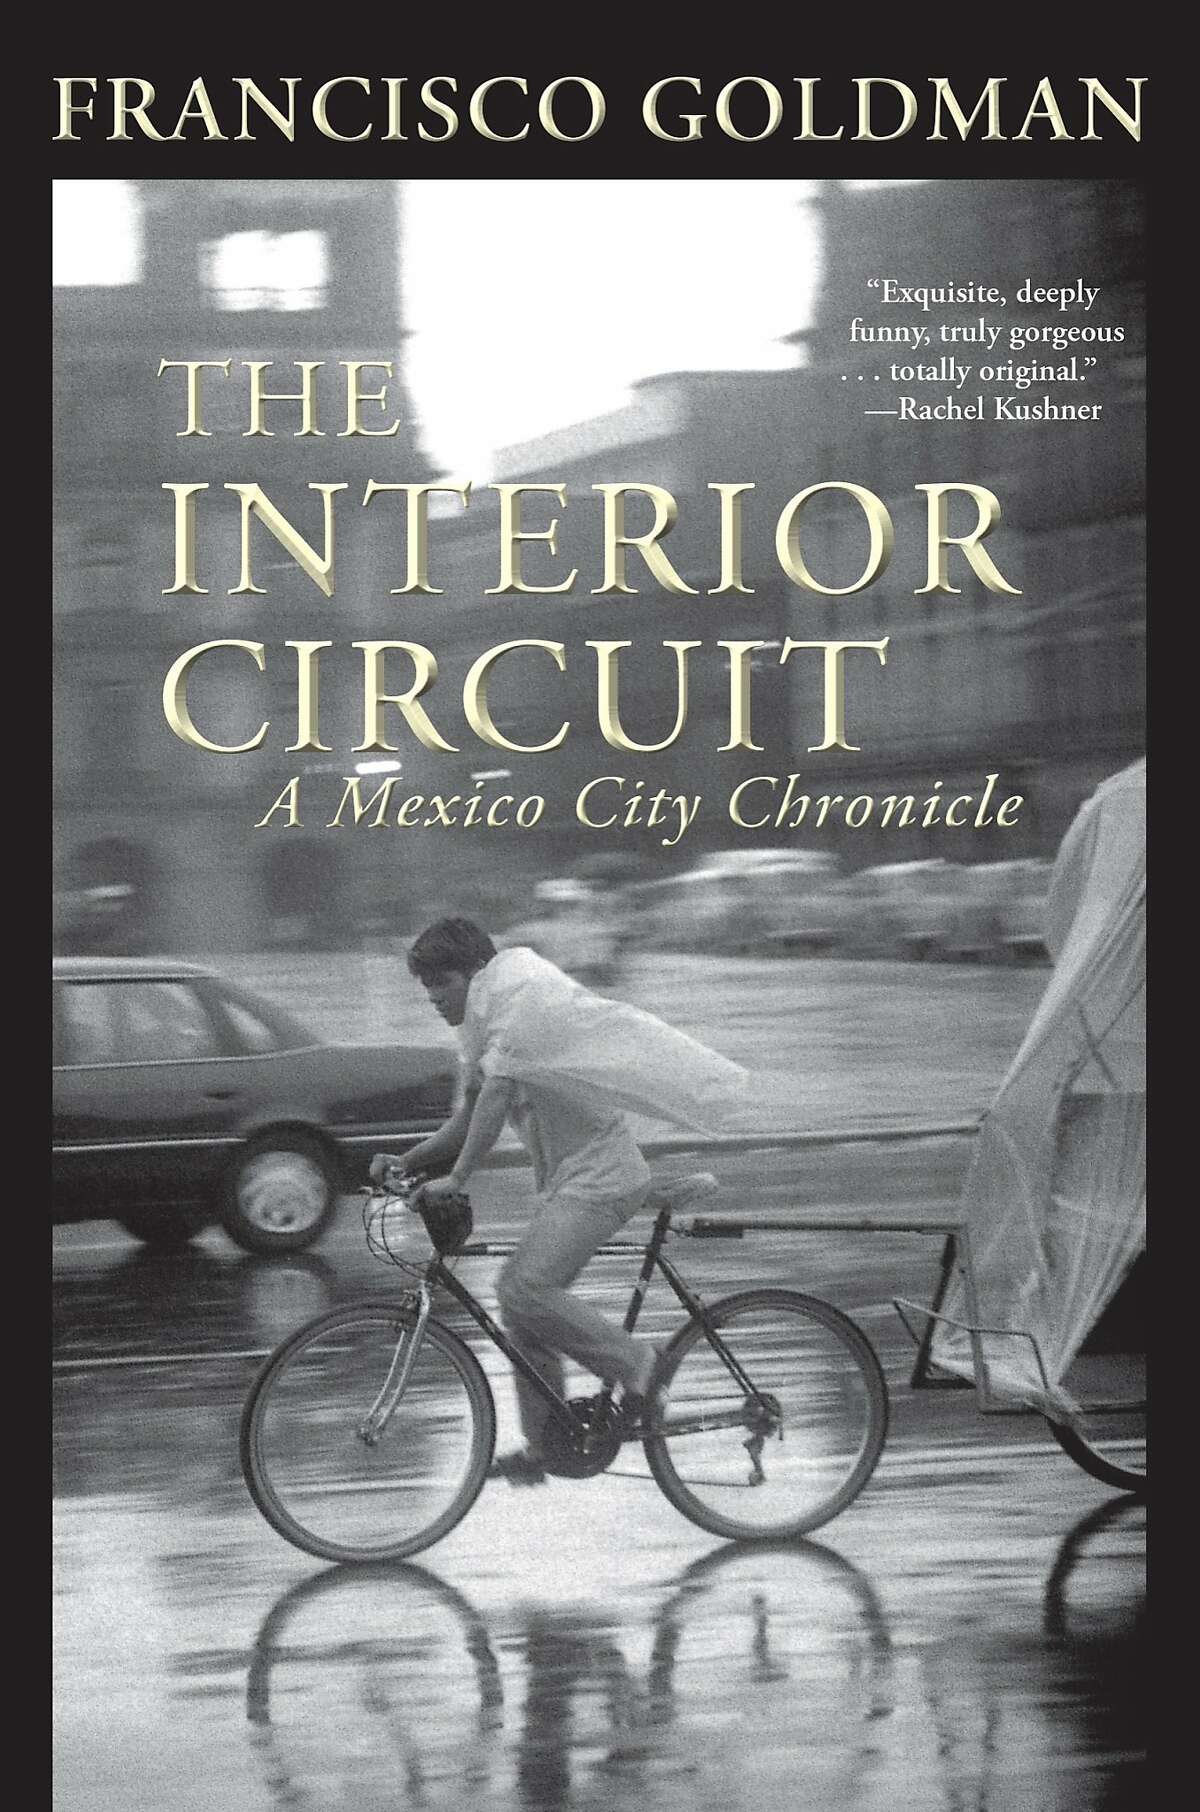 "The Interior Circuit," by Francisco Goldman